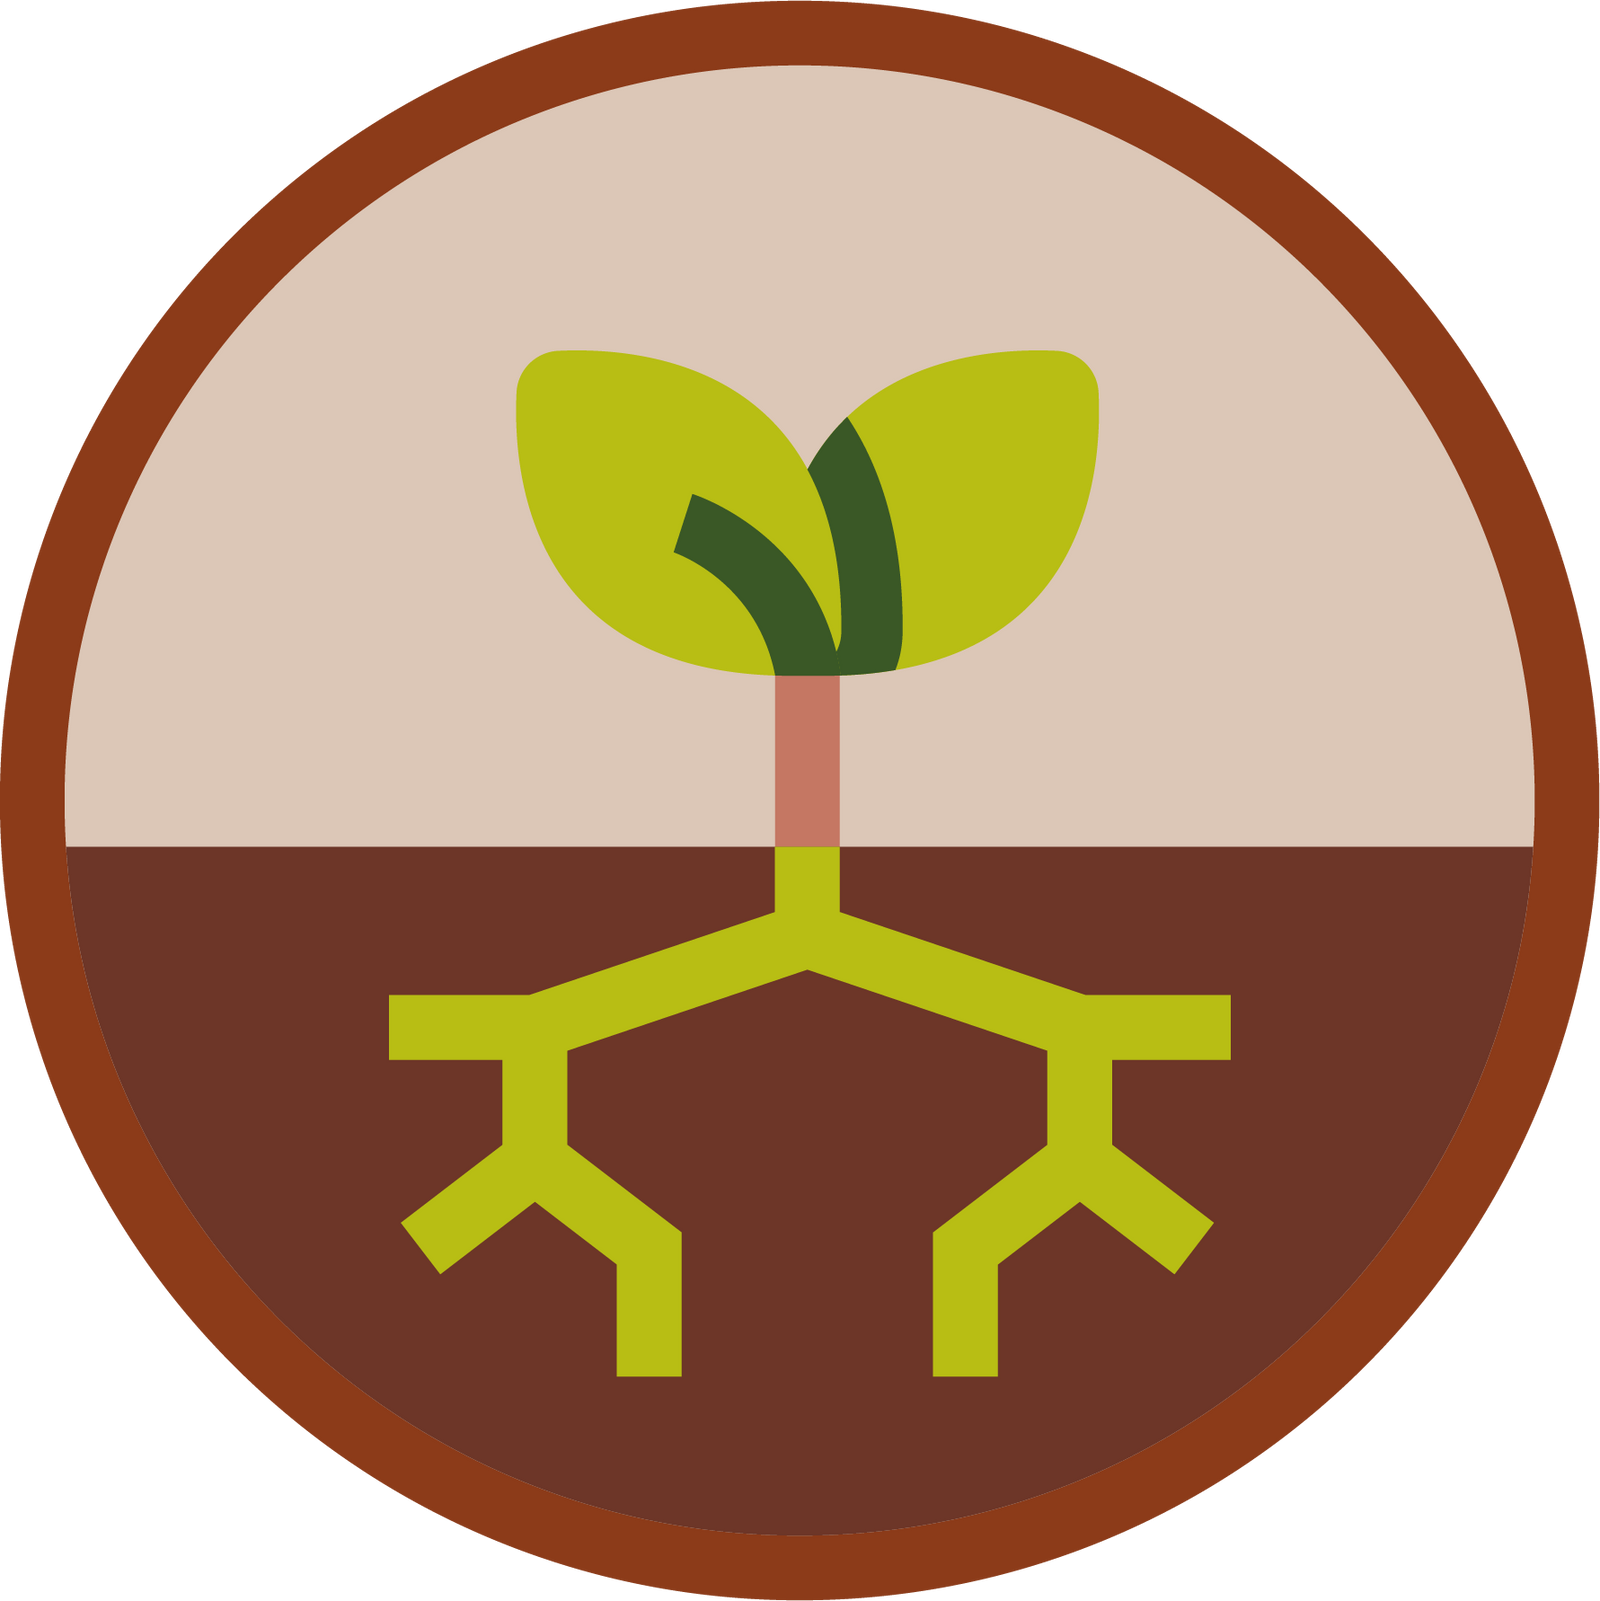 Image of an icon of a small three with two leaves and roots planted on the ground.